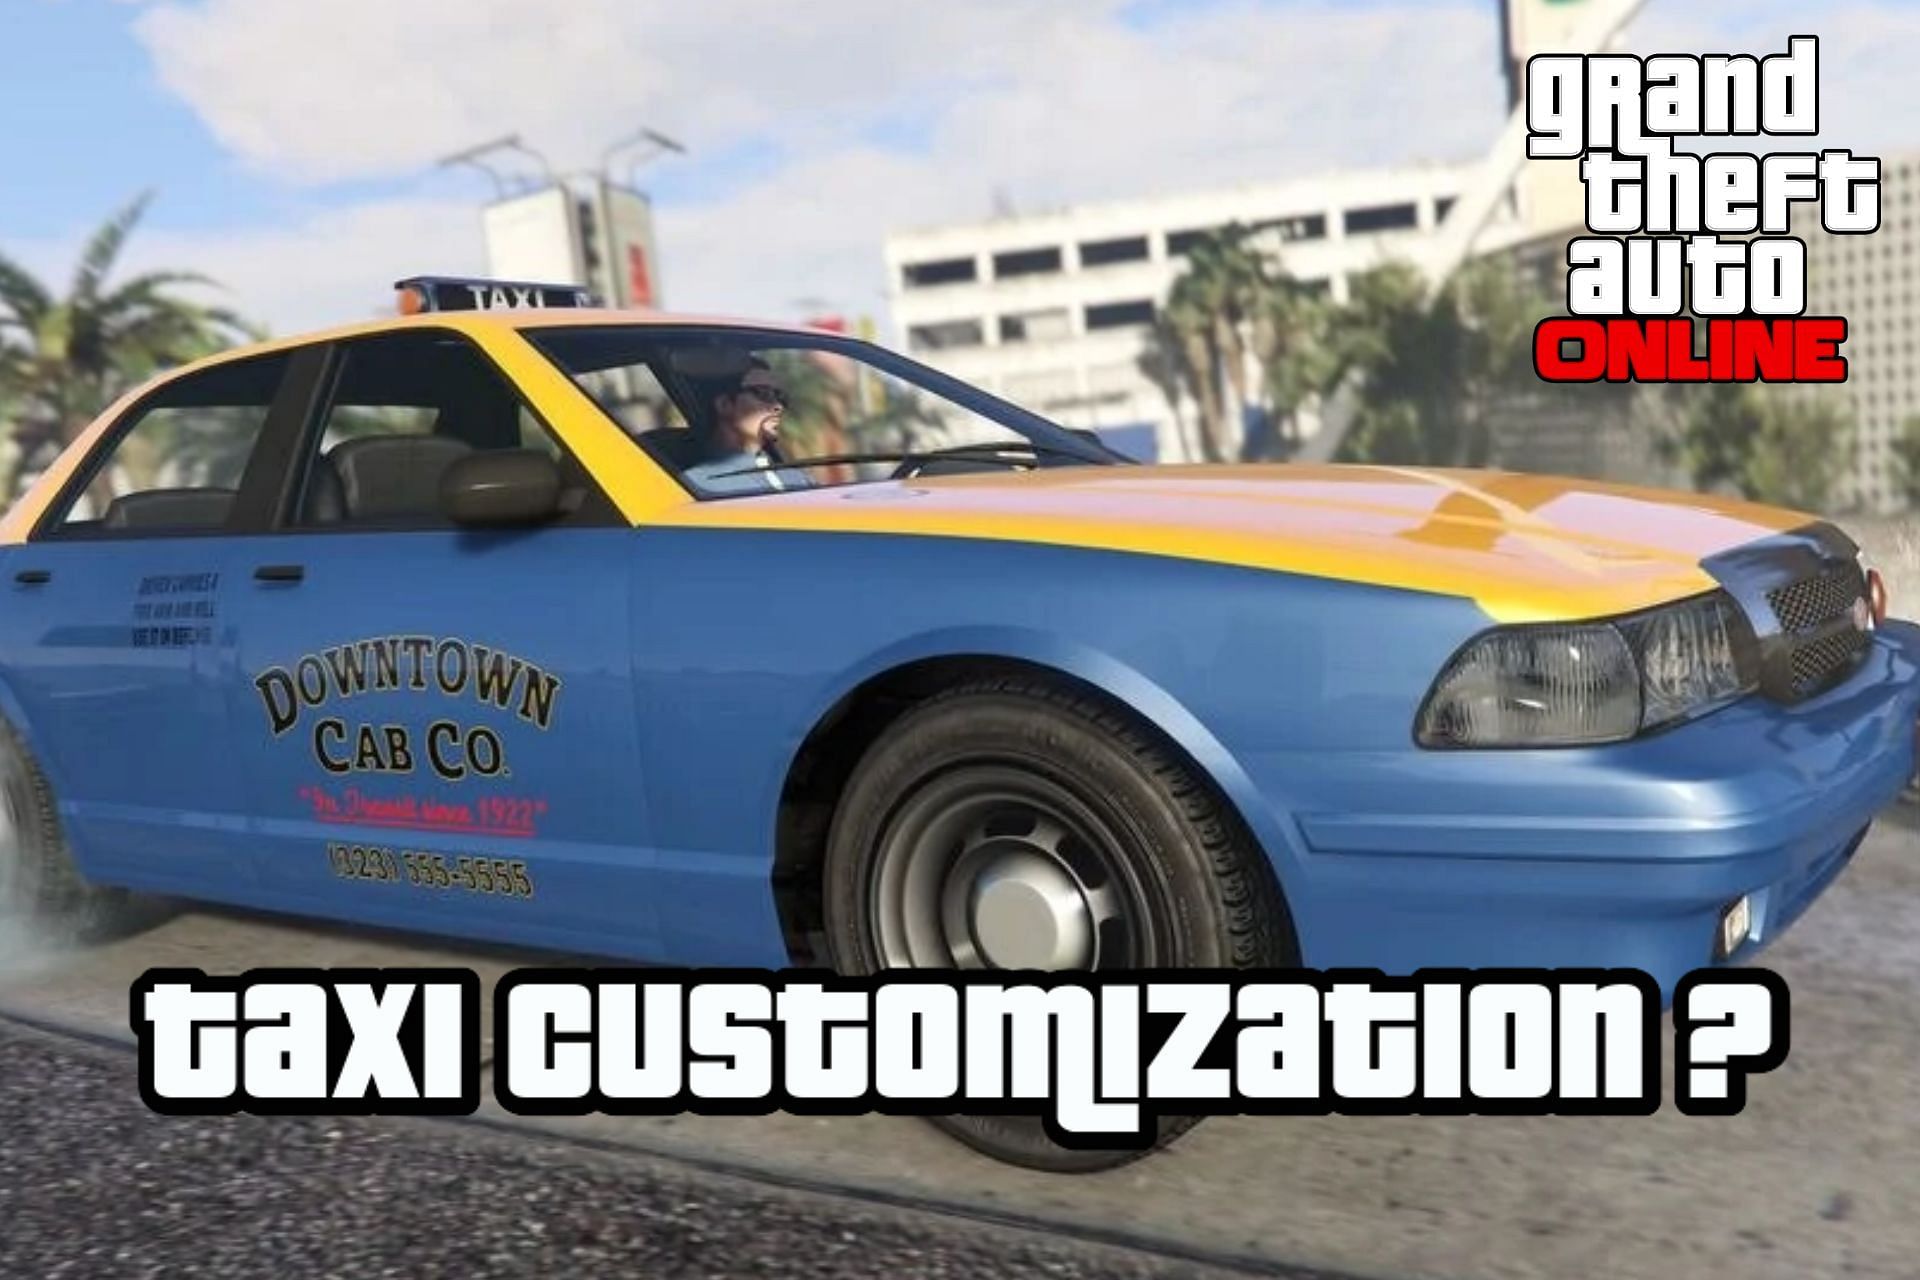 GTA Online players are looking for a way to customize the Taxi in GTA Online (Image via GTA Fandom)